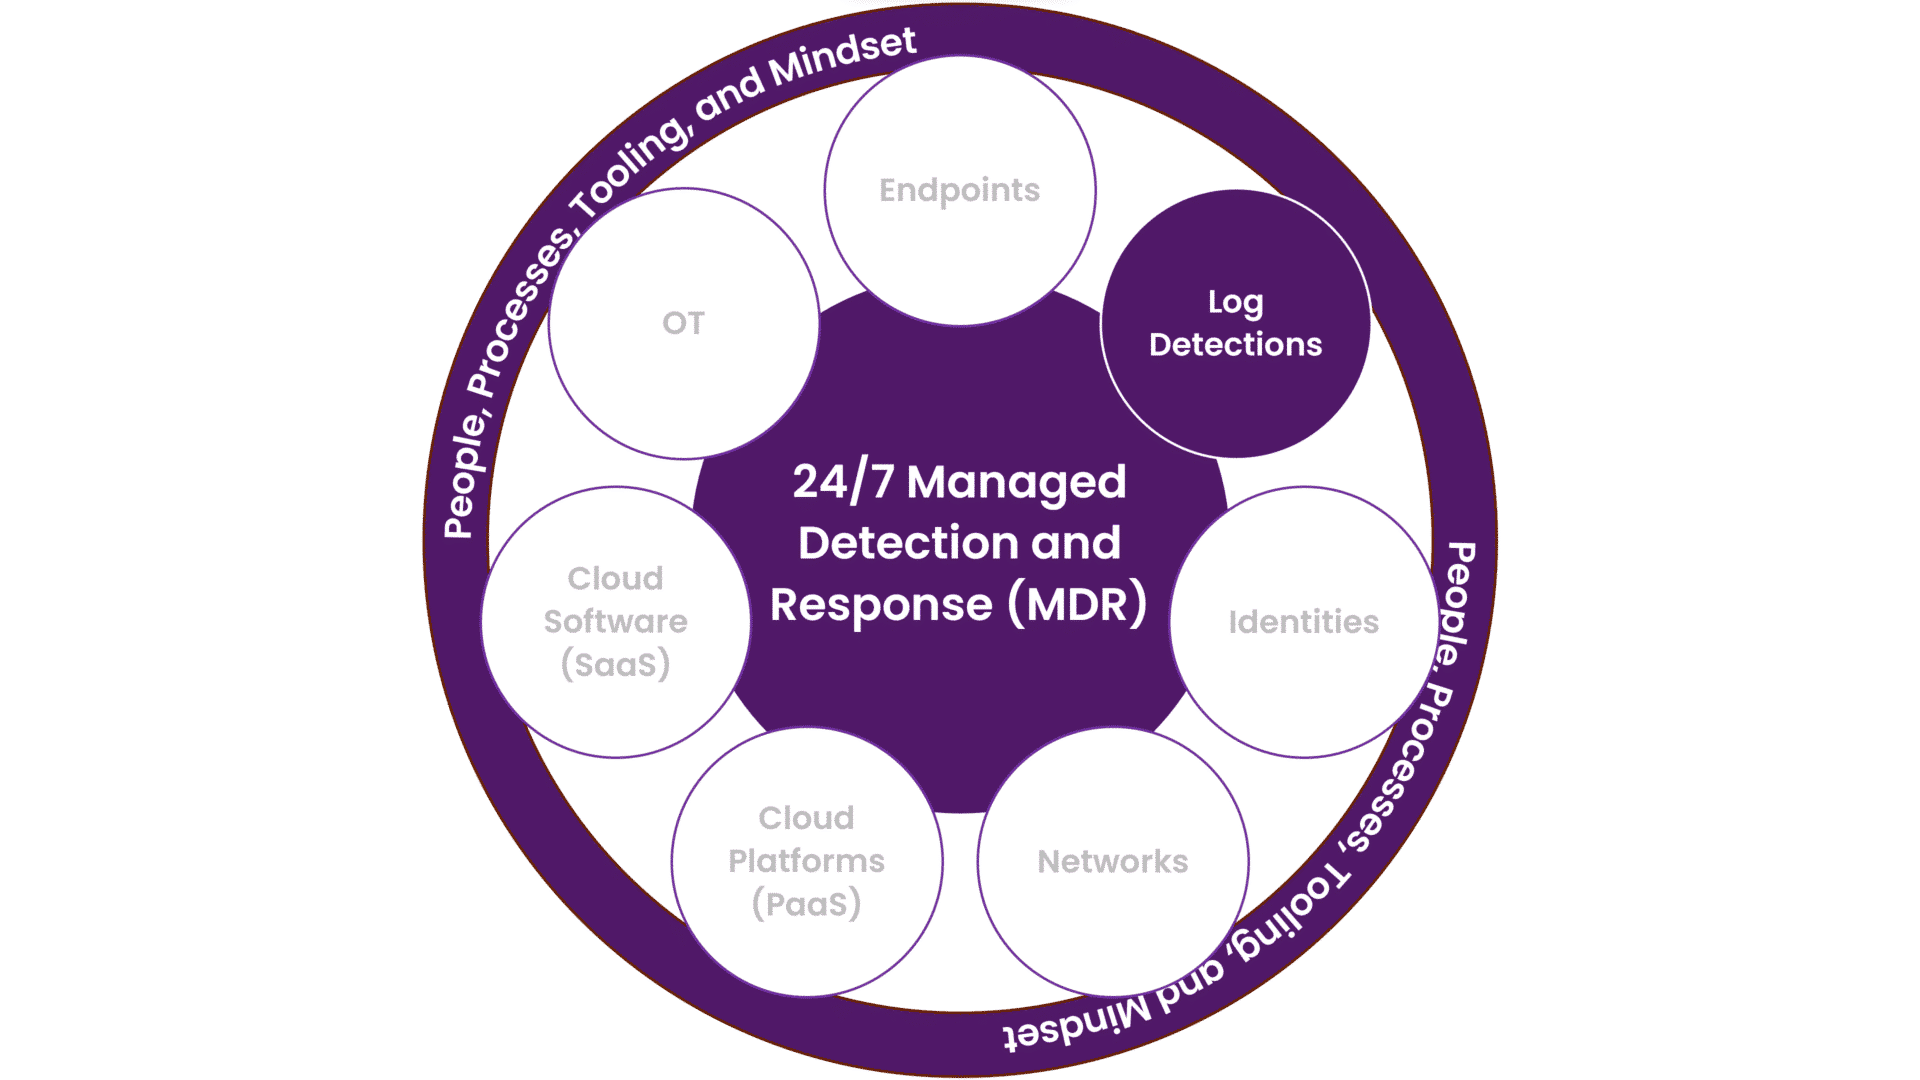 Illustration with the 24/7 managed detection and response service in the middle, and Log Detection as one of the seven available modules (the others are: Endpoints, Identities, Networks, Cloud Platforms (PaaS), Cloud Software (SaaS) and OT). And enclosing them all are a circle with "People, Processes, Tooling and Mindset".
This to illustrate the parts of a SOC.